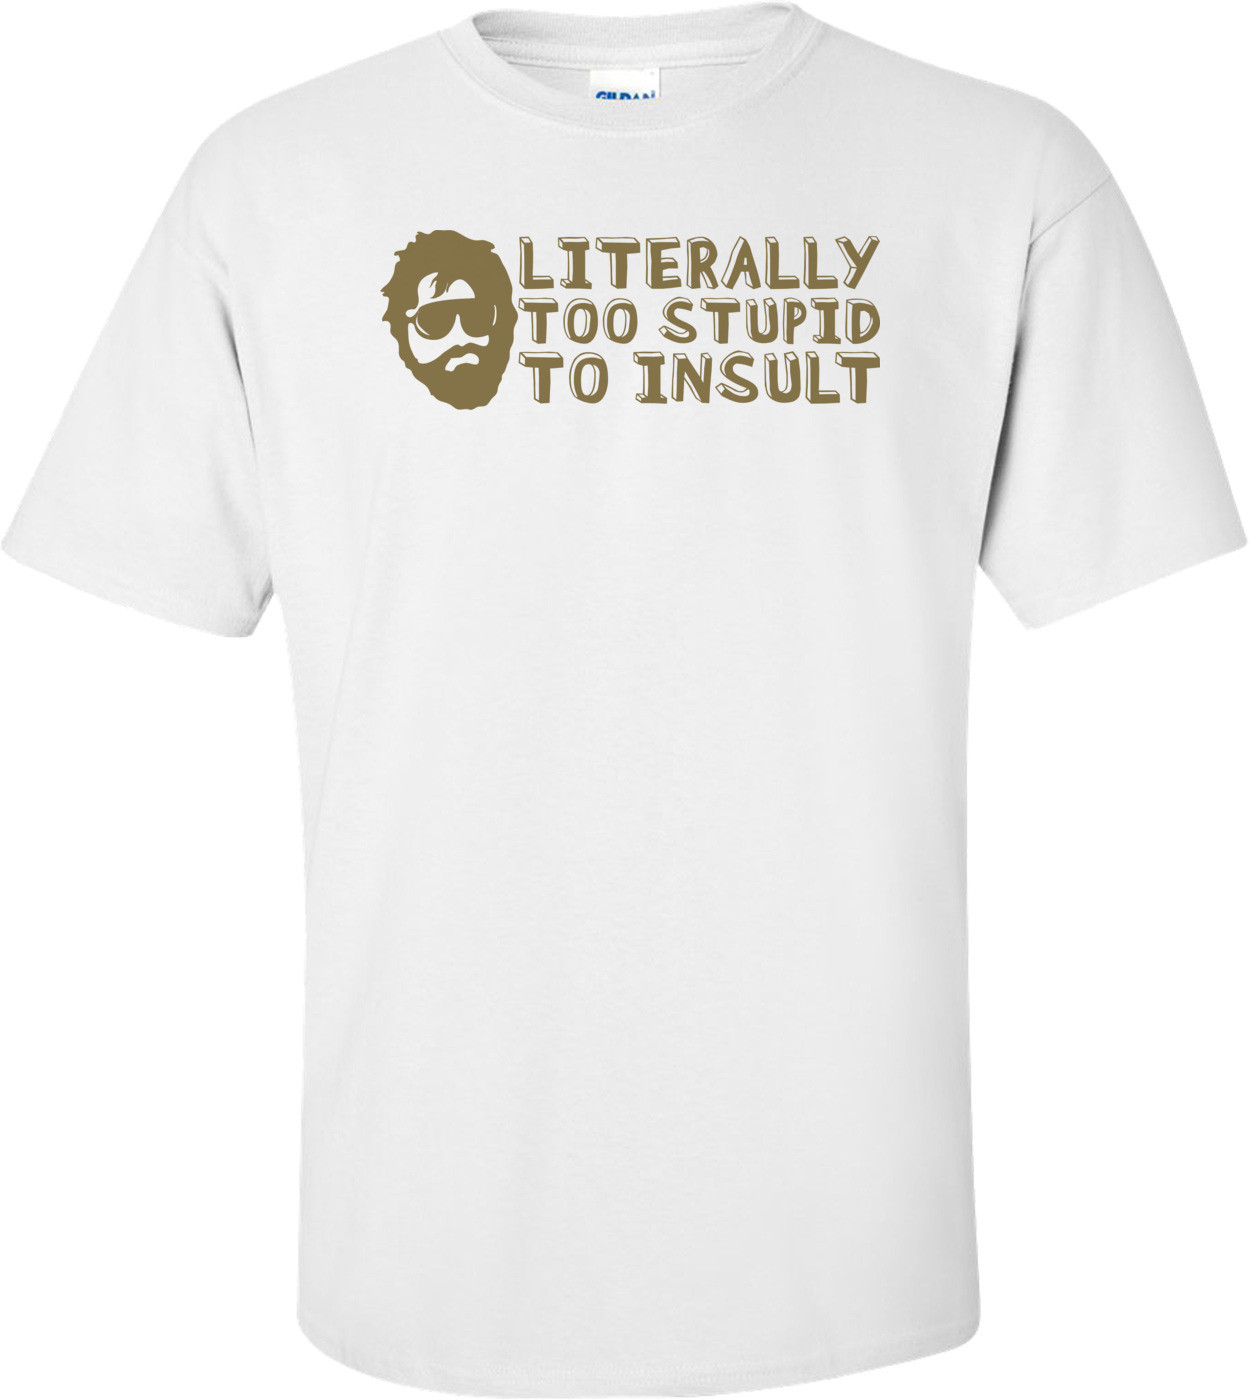 Literally Too Stupid To Insult - The Hangover T-shirt